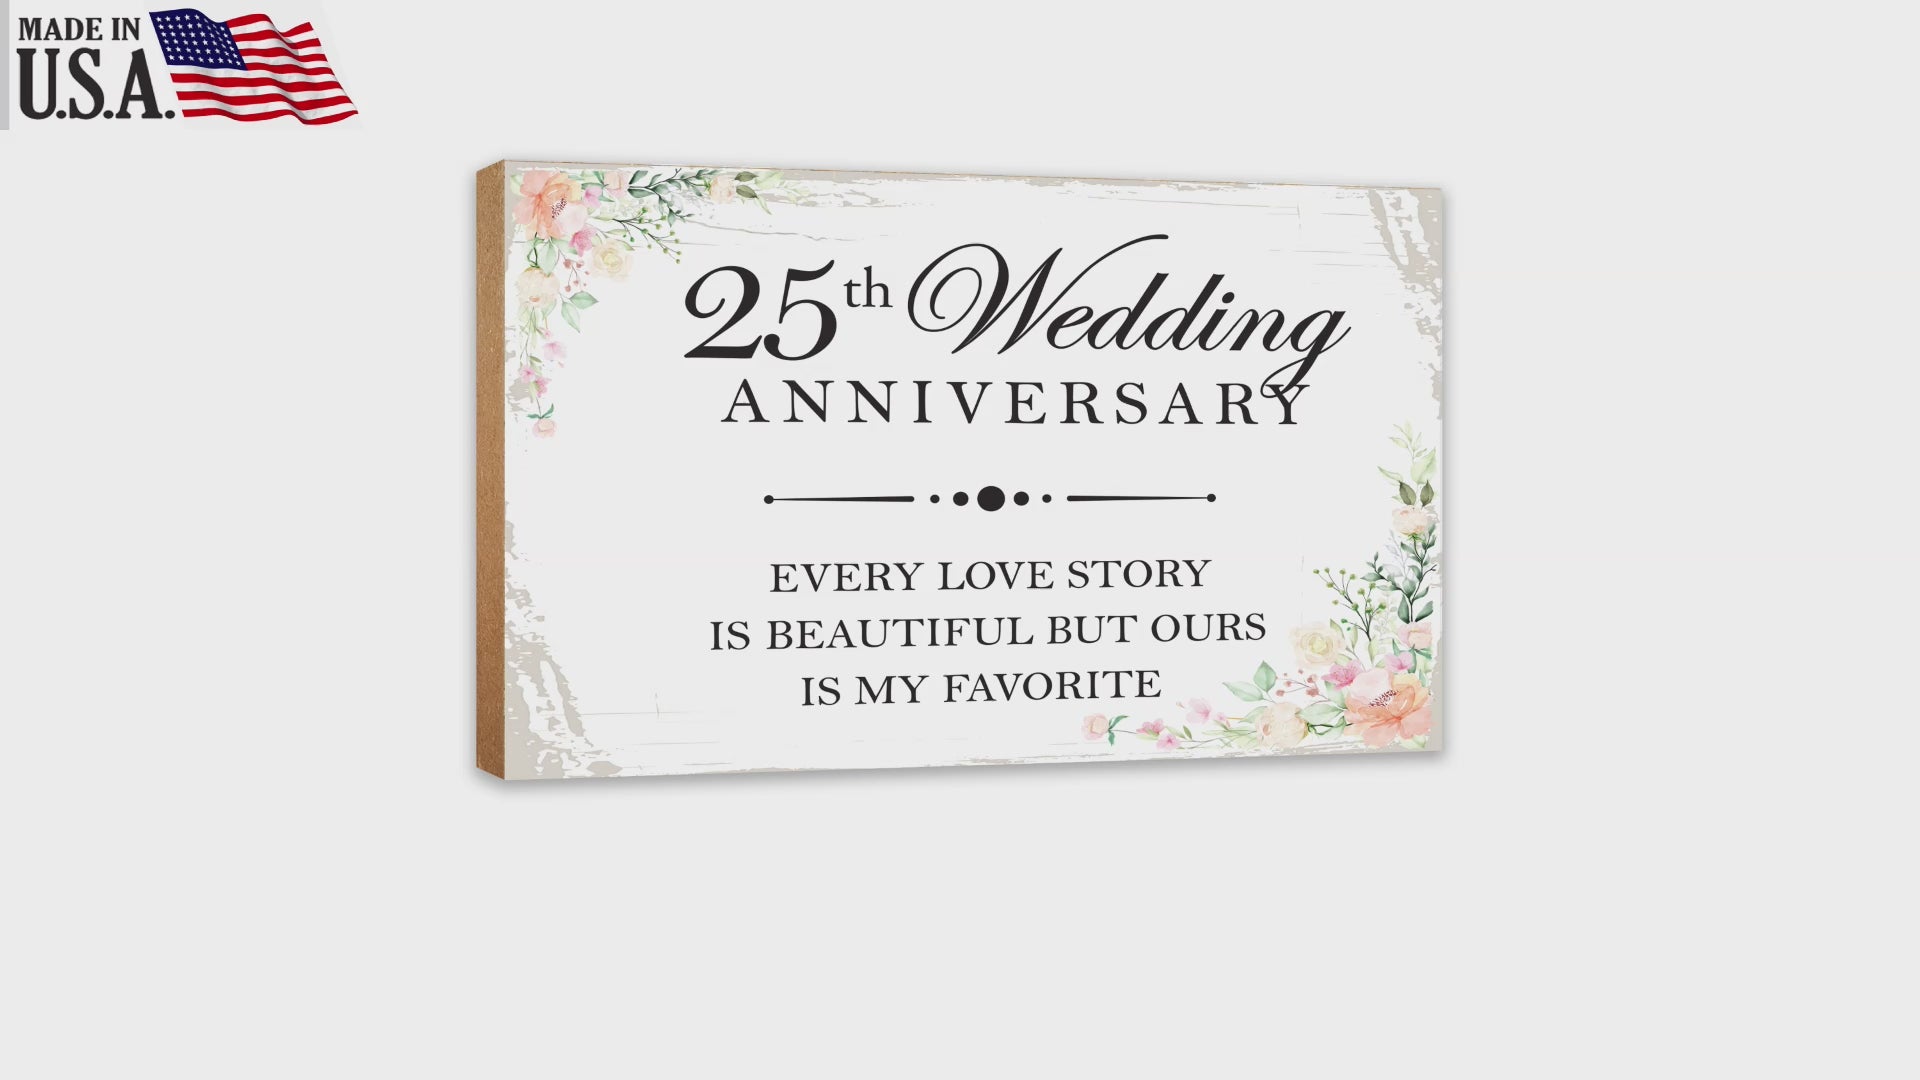 25th Wedding Anniversary Unique Shelf Decor and Tabletop Signs Gifts for Couples - Every Love Story